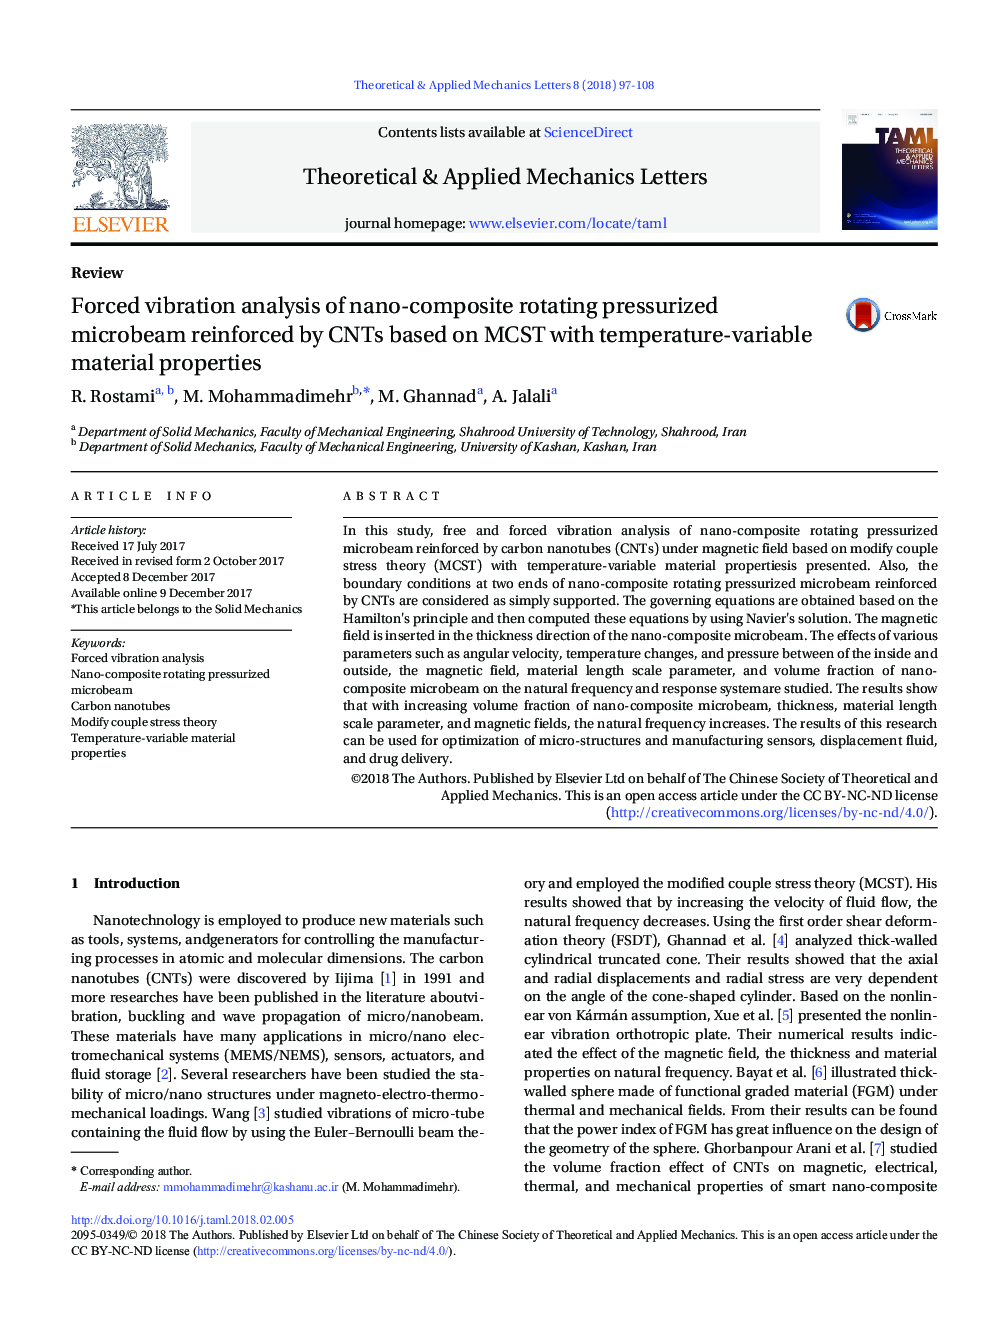 Forced vibration analysis of nano-composite rotating pressurized microbeam reinforced by CNTs based on MCST with temperature-variable material properties